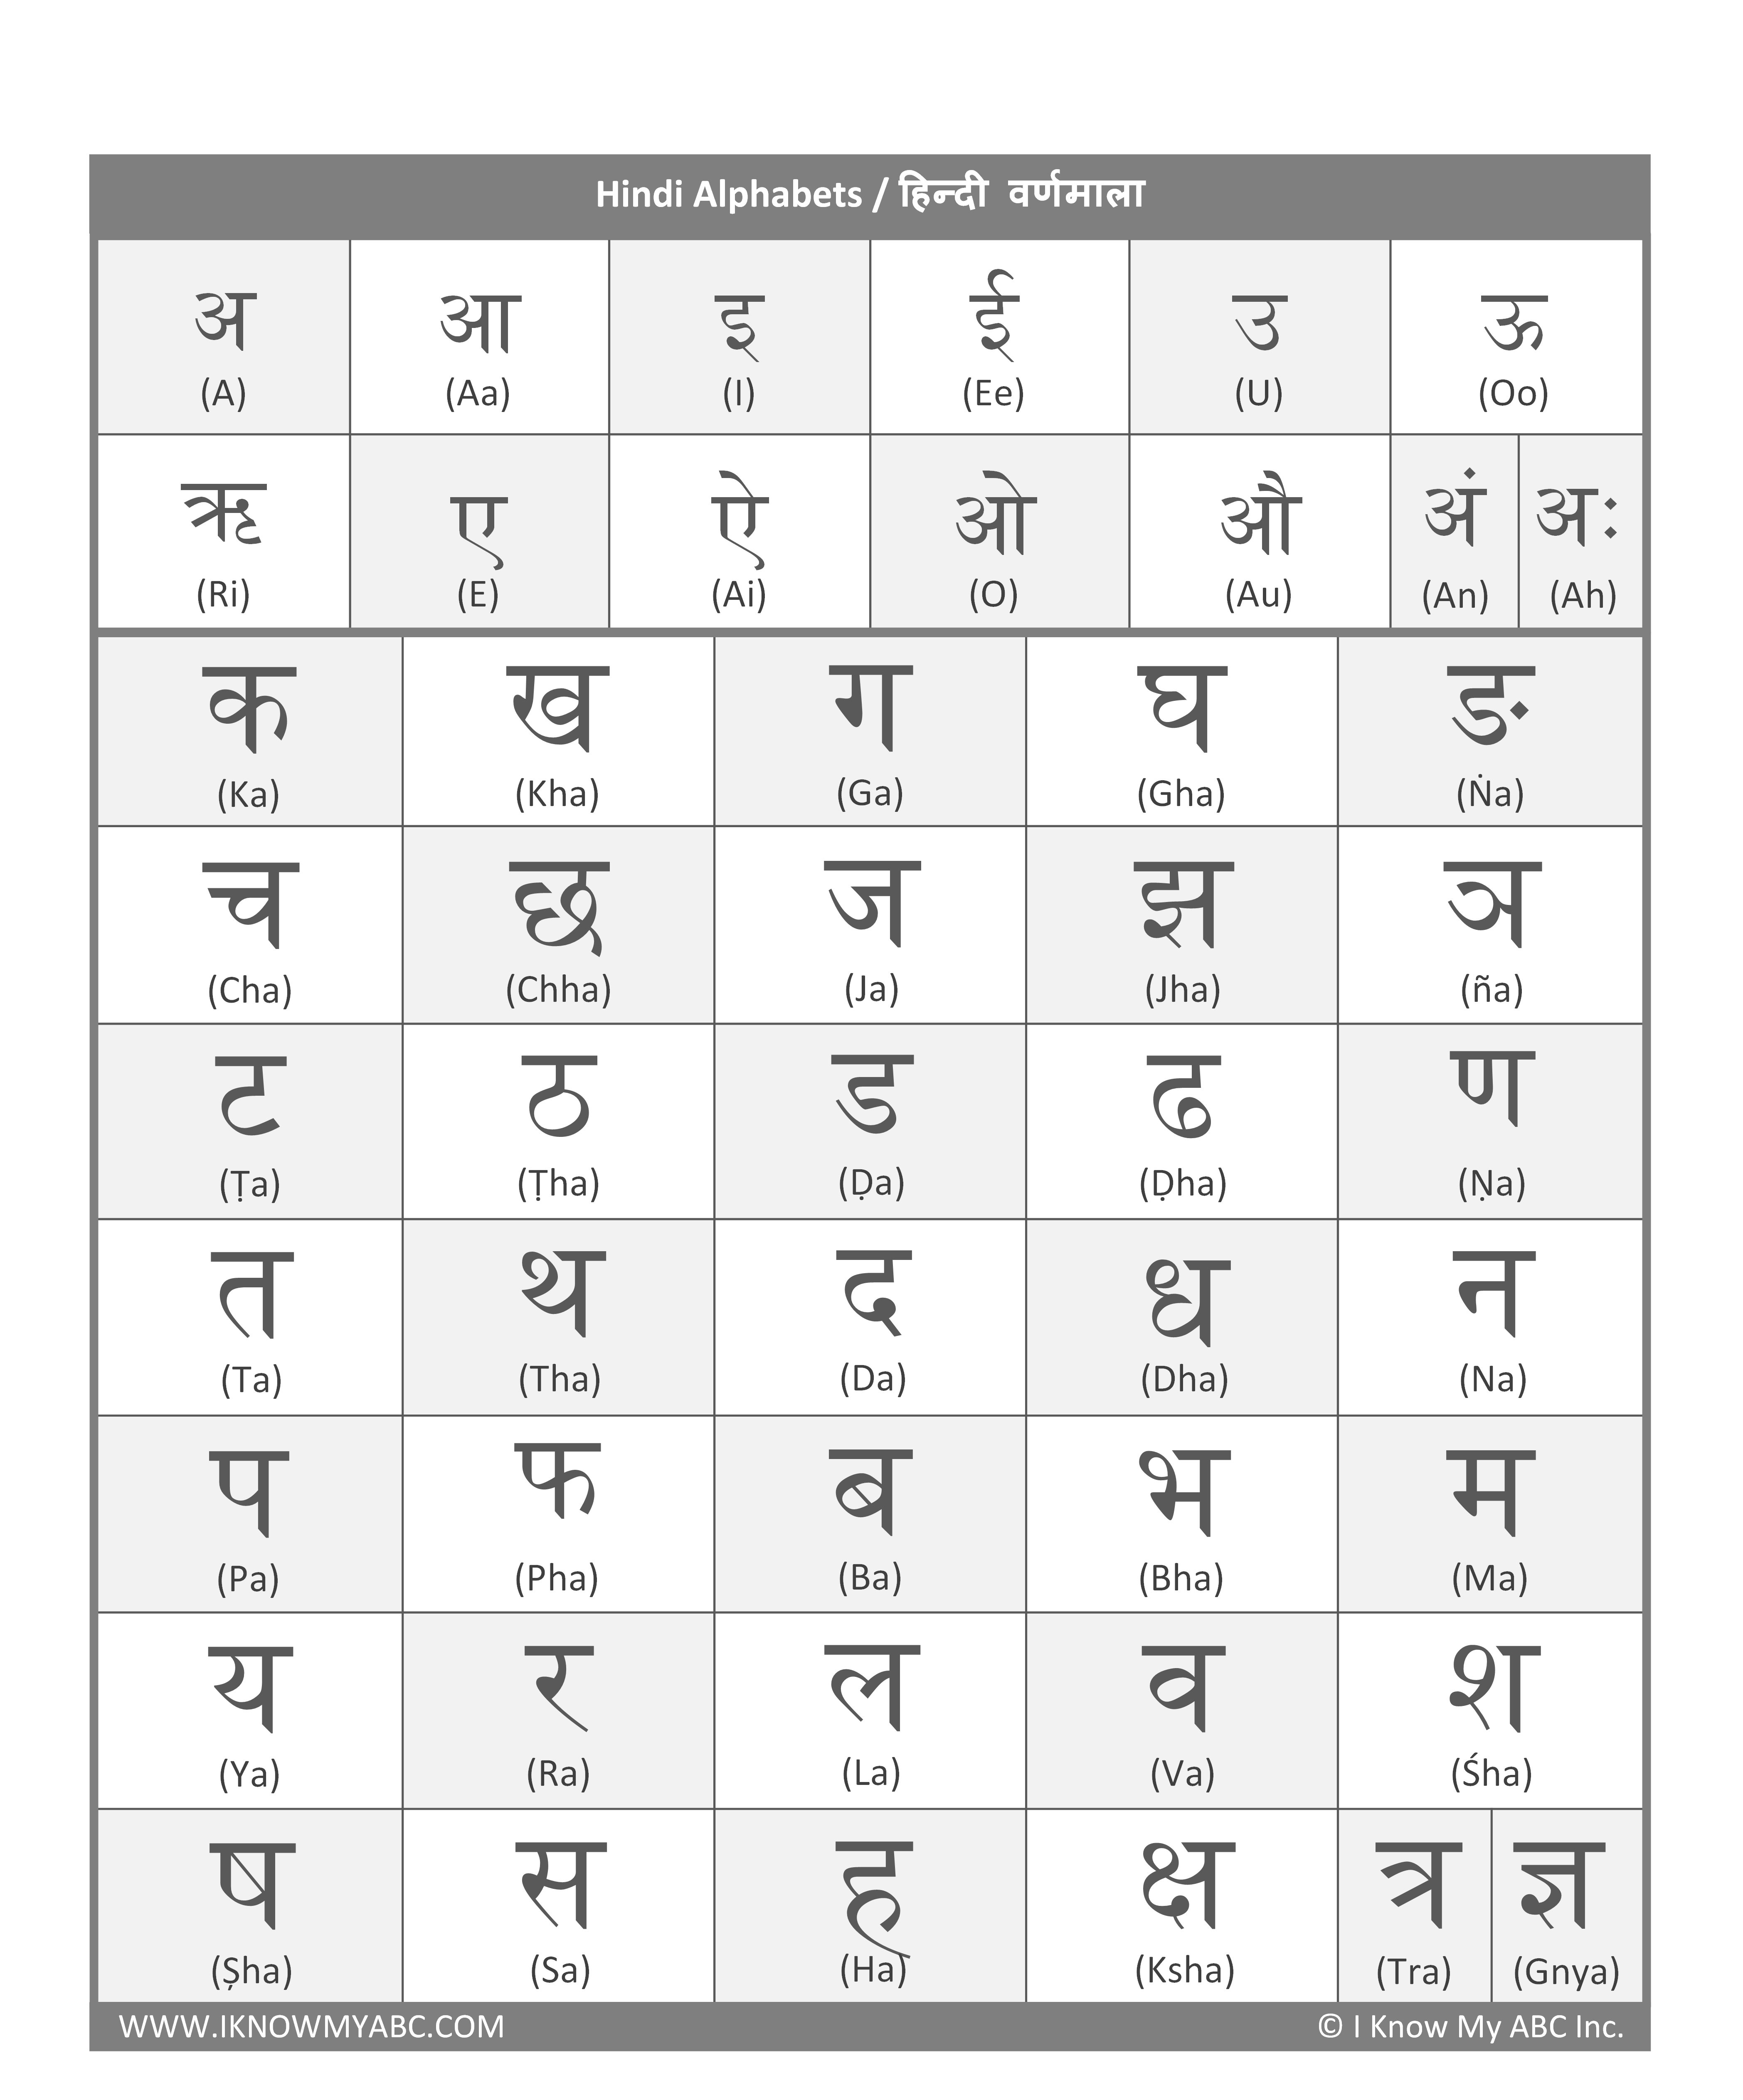 Learn Hindi Alphabet Free Educational Resources I Know My ABC Inc.